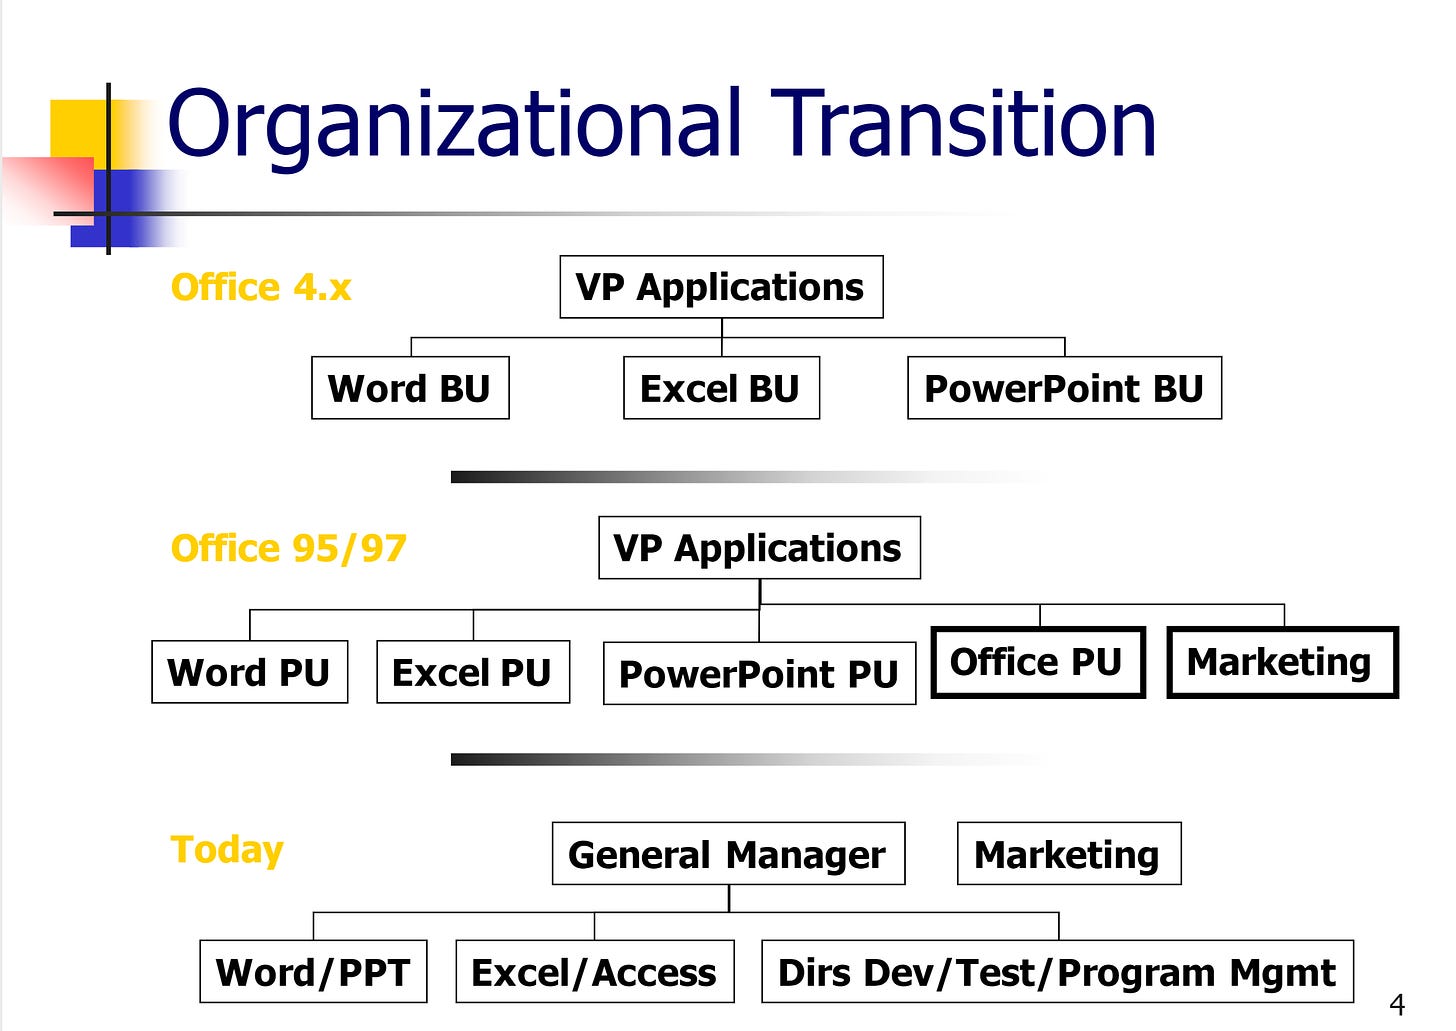 Office organization transition showing the 4.x org of Business Units, the 95/97 org showing the addition of the Office Product Unit, and the new organization showing the combined Word/PowerPoint, and Excel/Access teams with the OPU team.